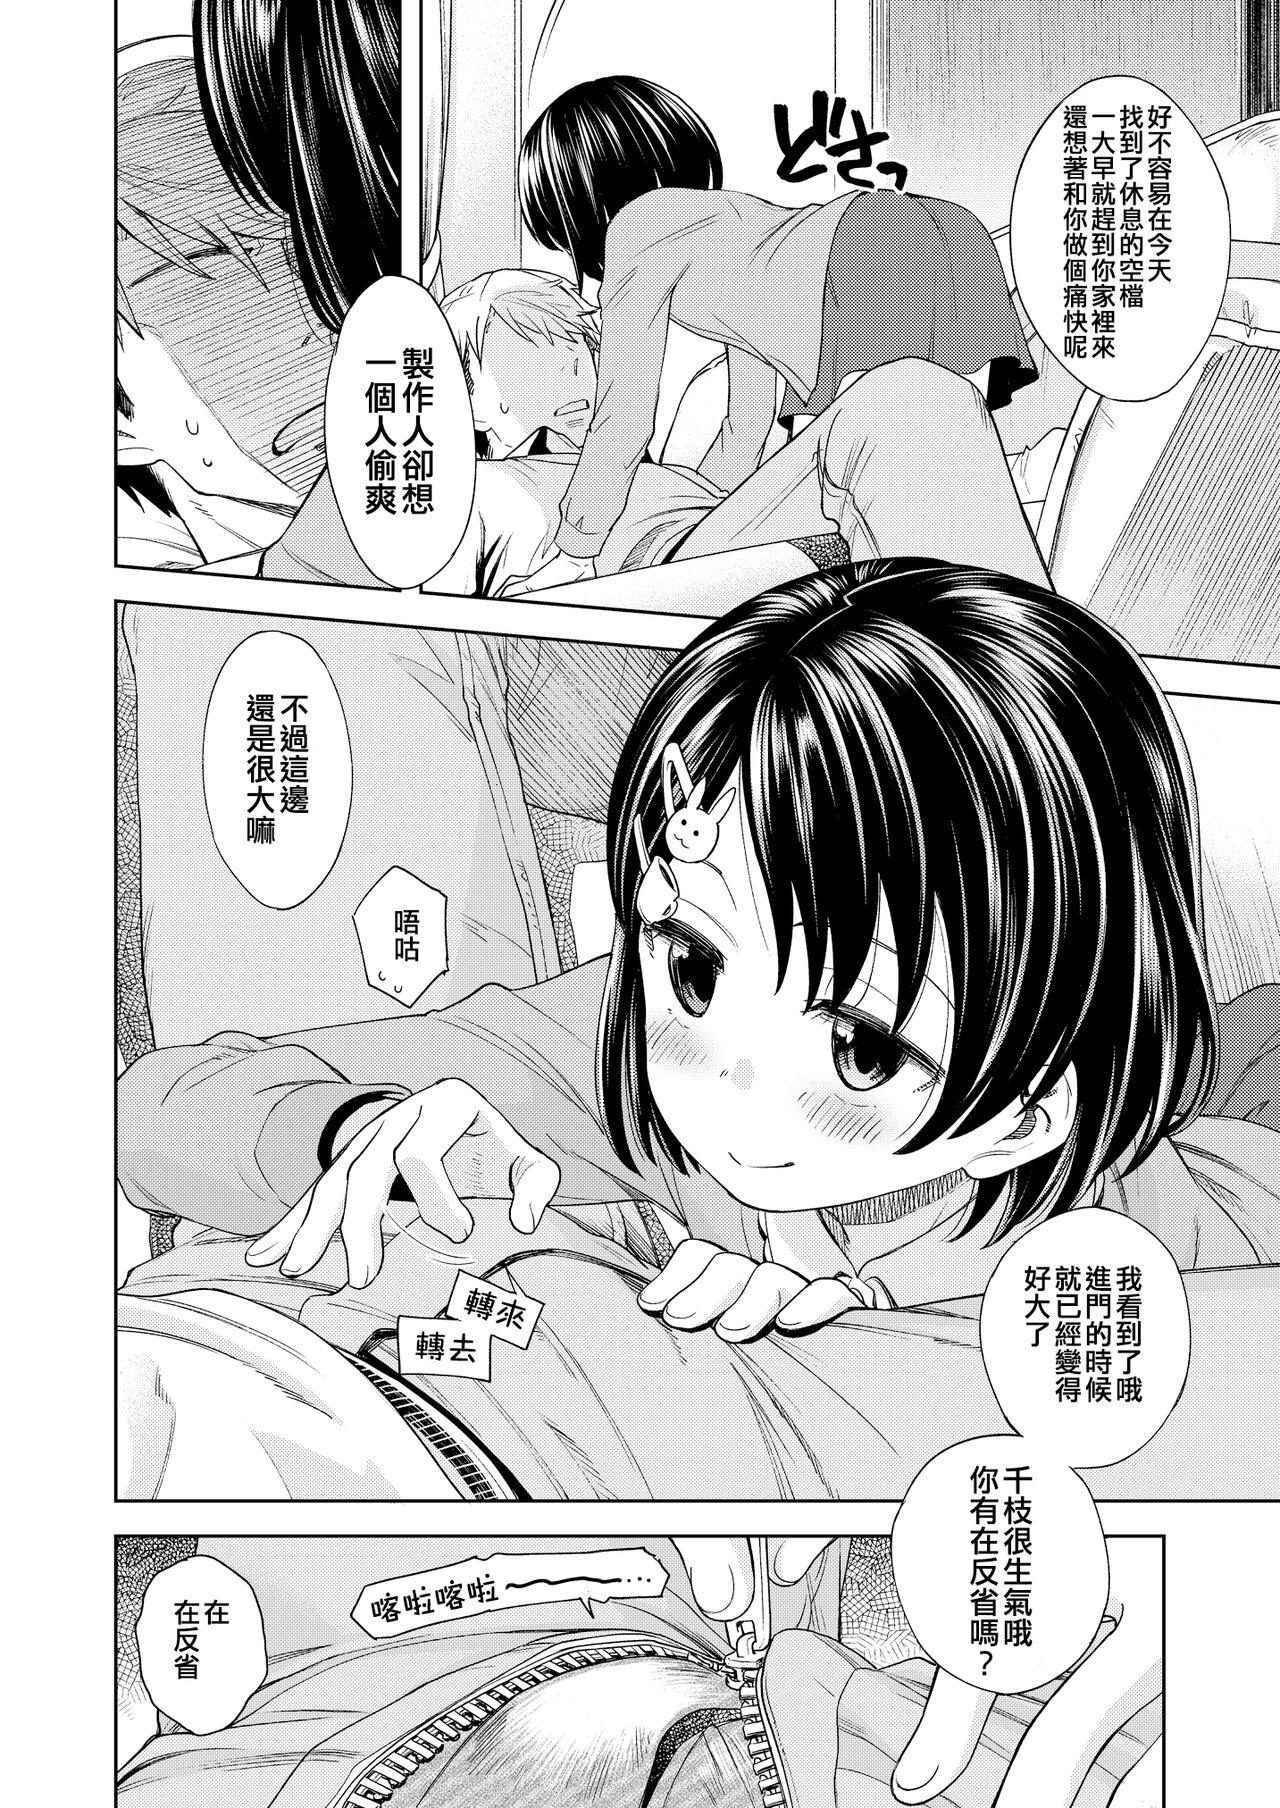 Home Warui Ko Chie-chan 3 - The idolmaster Party - Page 8